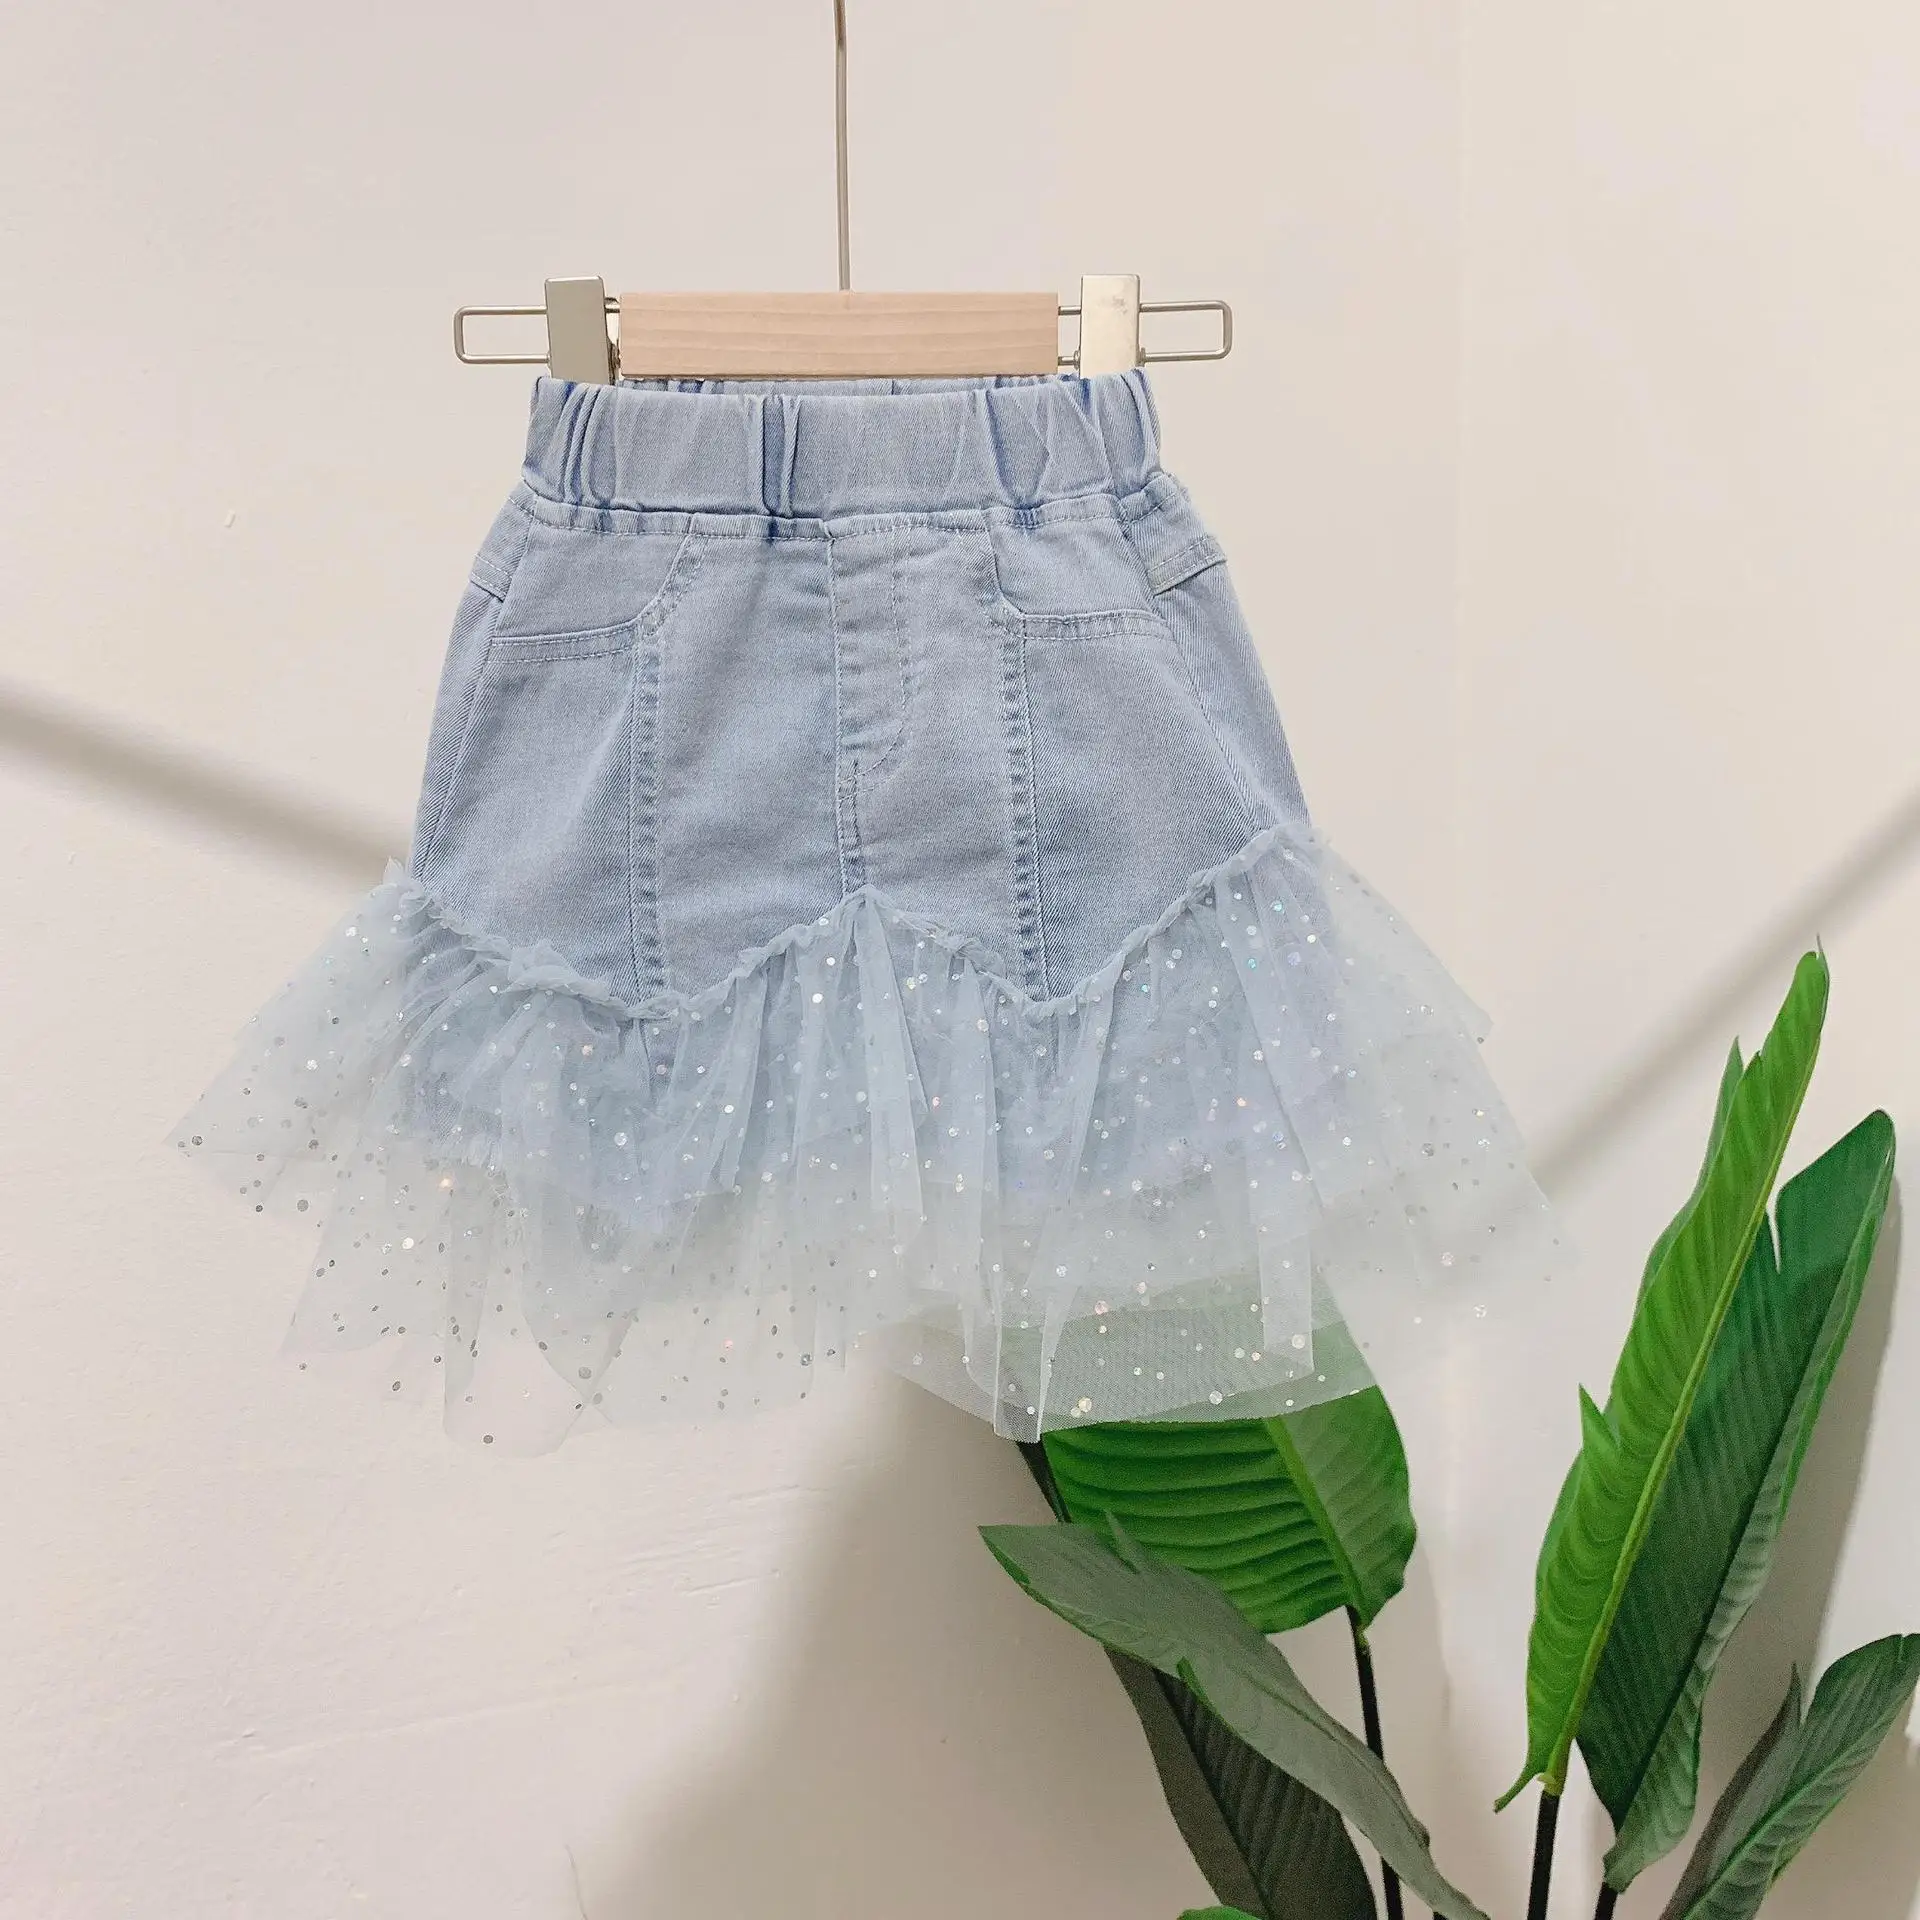 Buy The Children's Place Baby 5-pocket Denim Skirt, China Blue, 9-12 Months  at Amazon.in